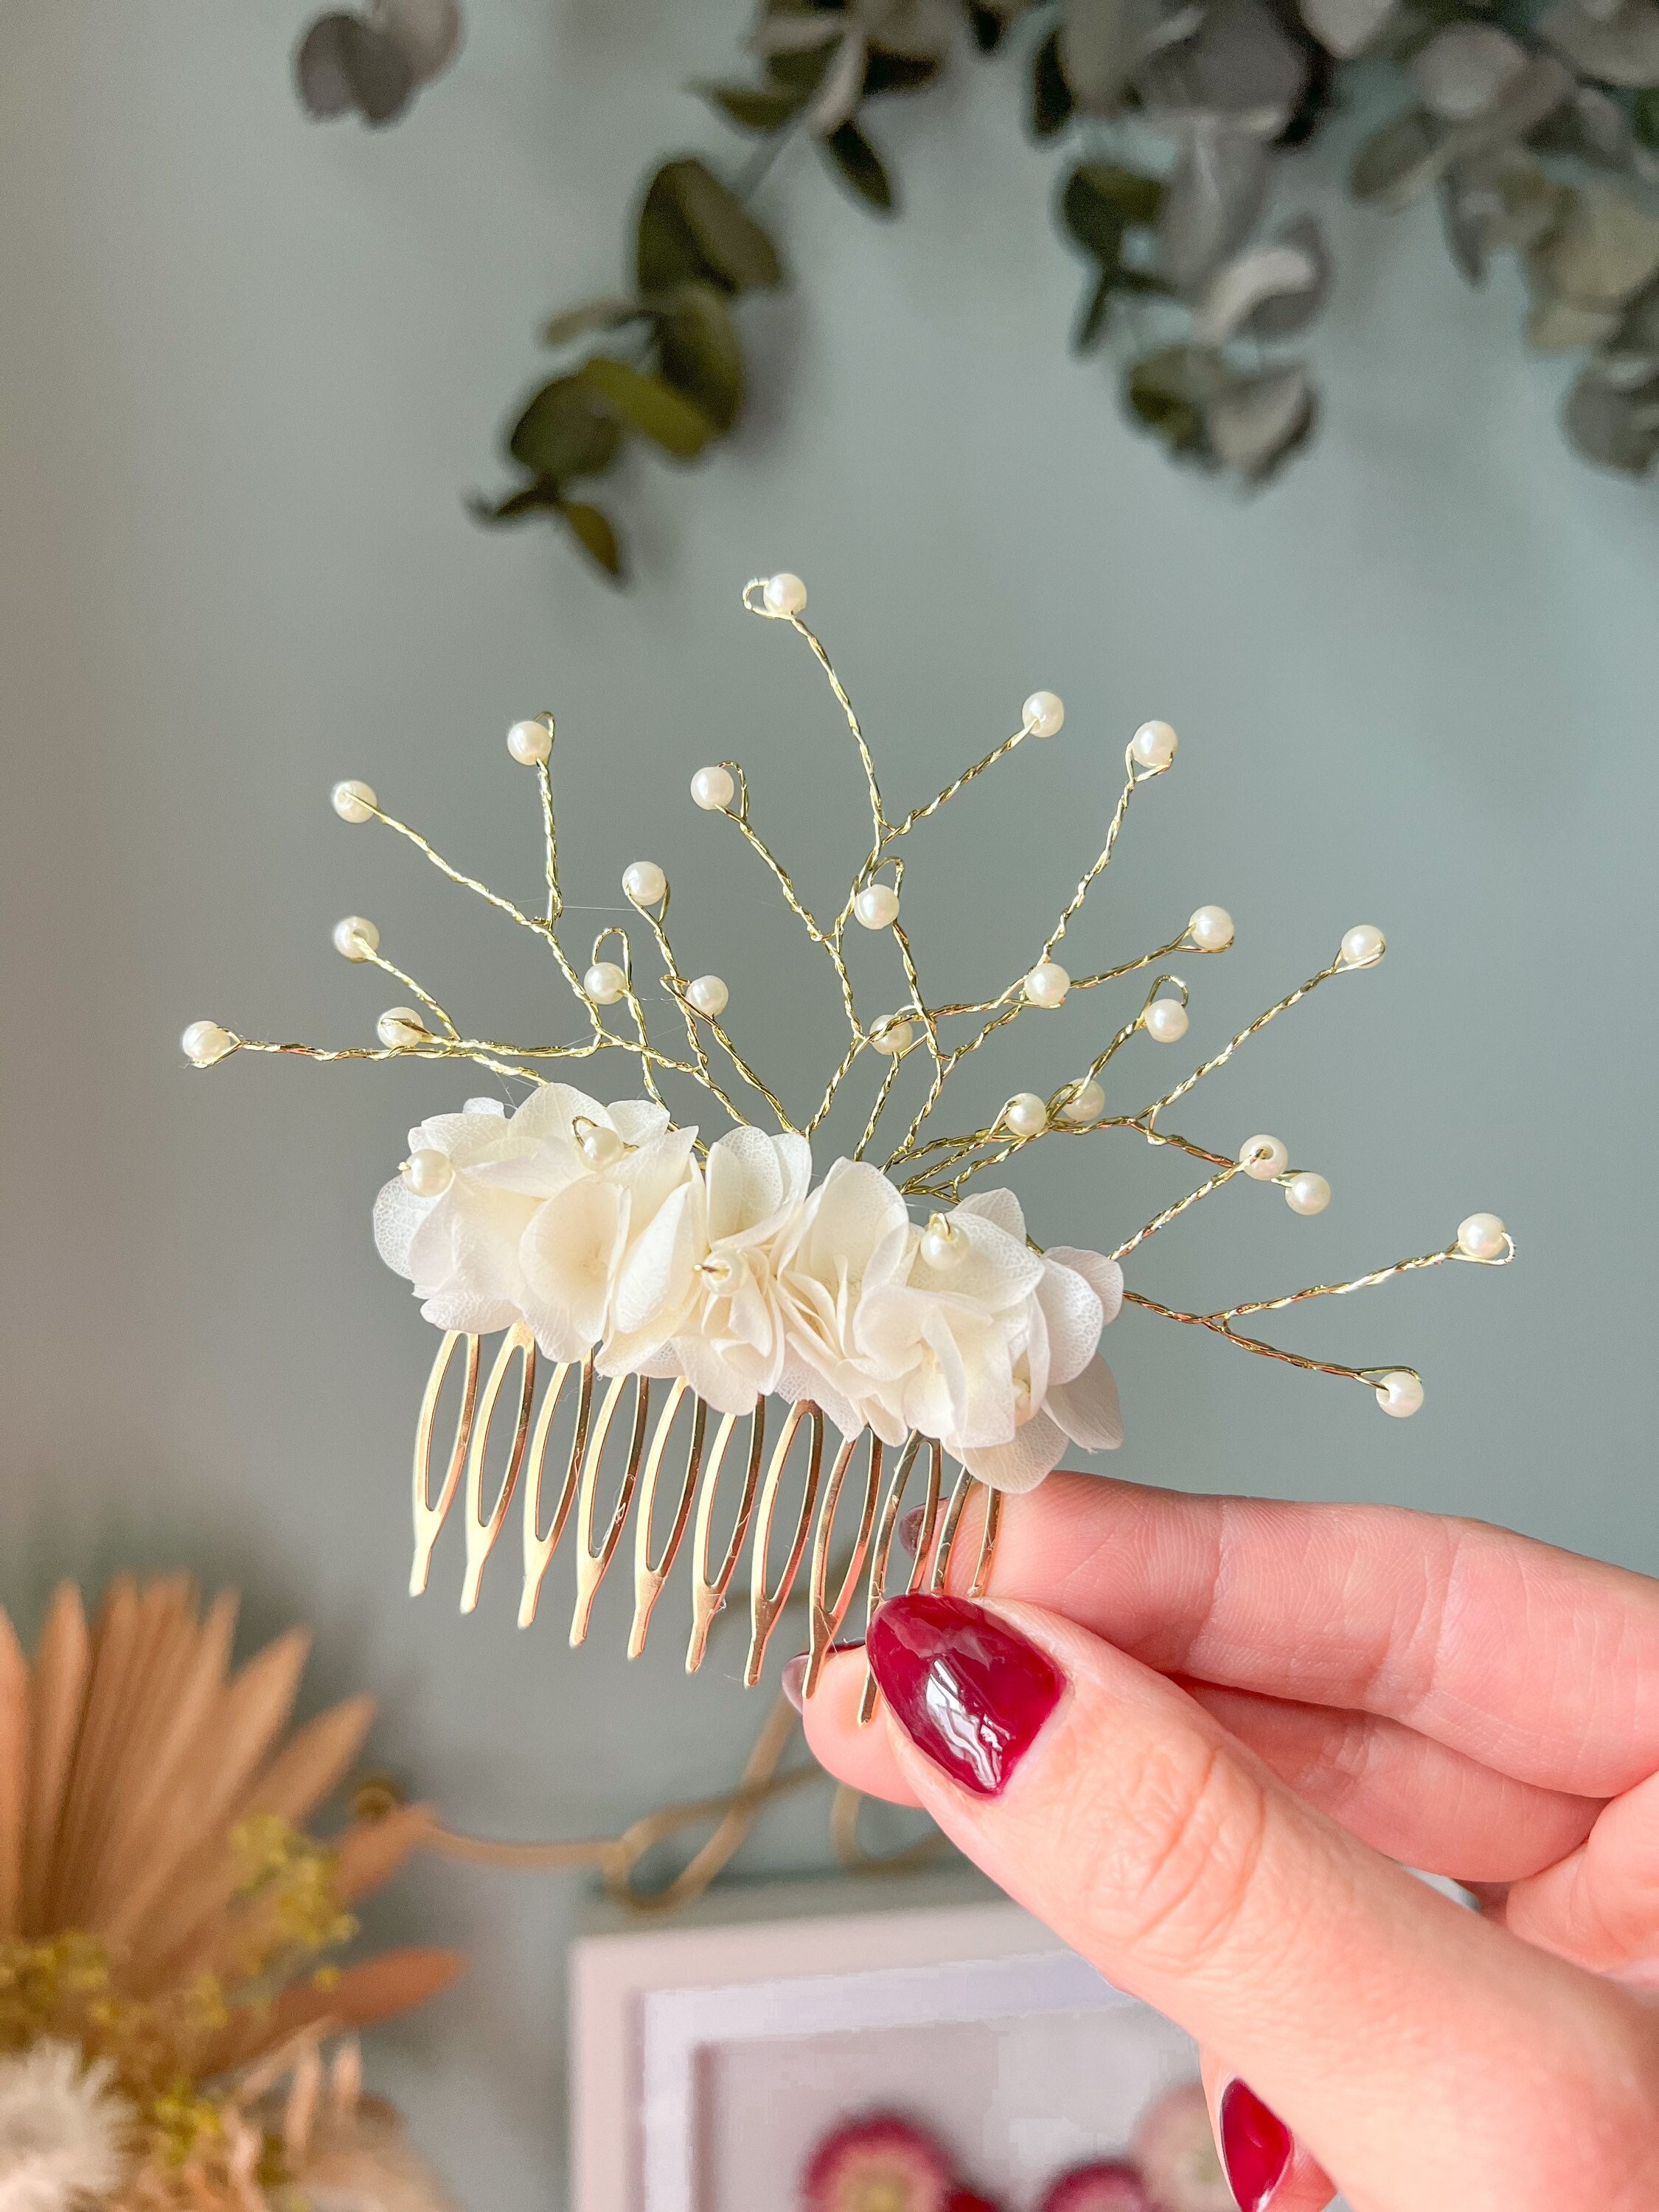 Boho Wedding Flower Hair Comb White & Gold Accessories For Bride, Classic Ivory Piece Pearl